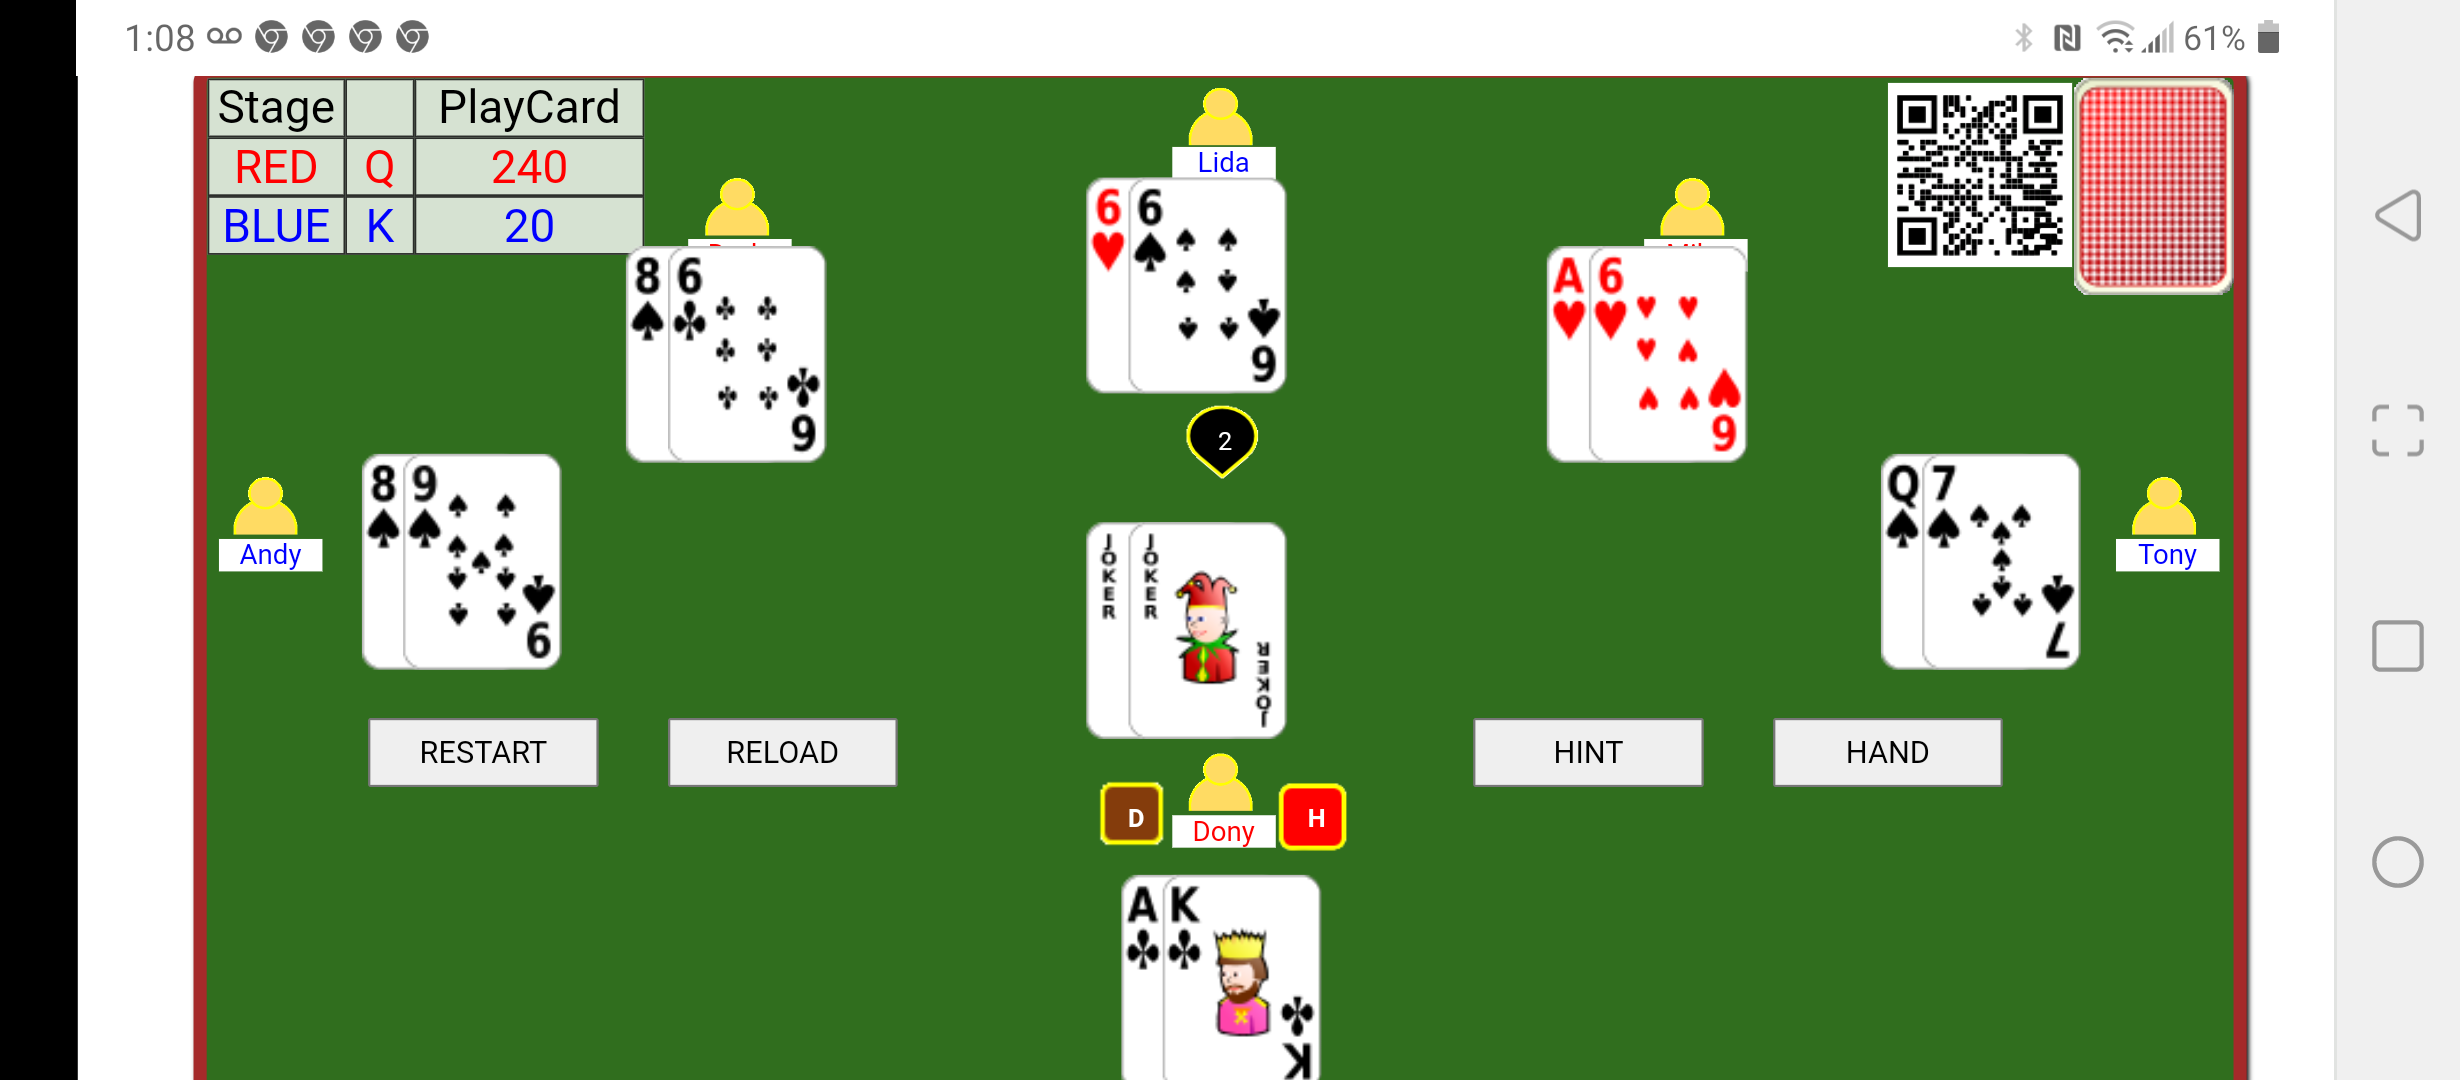 html5 tractor card game Screenshot_20220126-010855.png